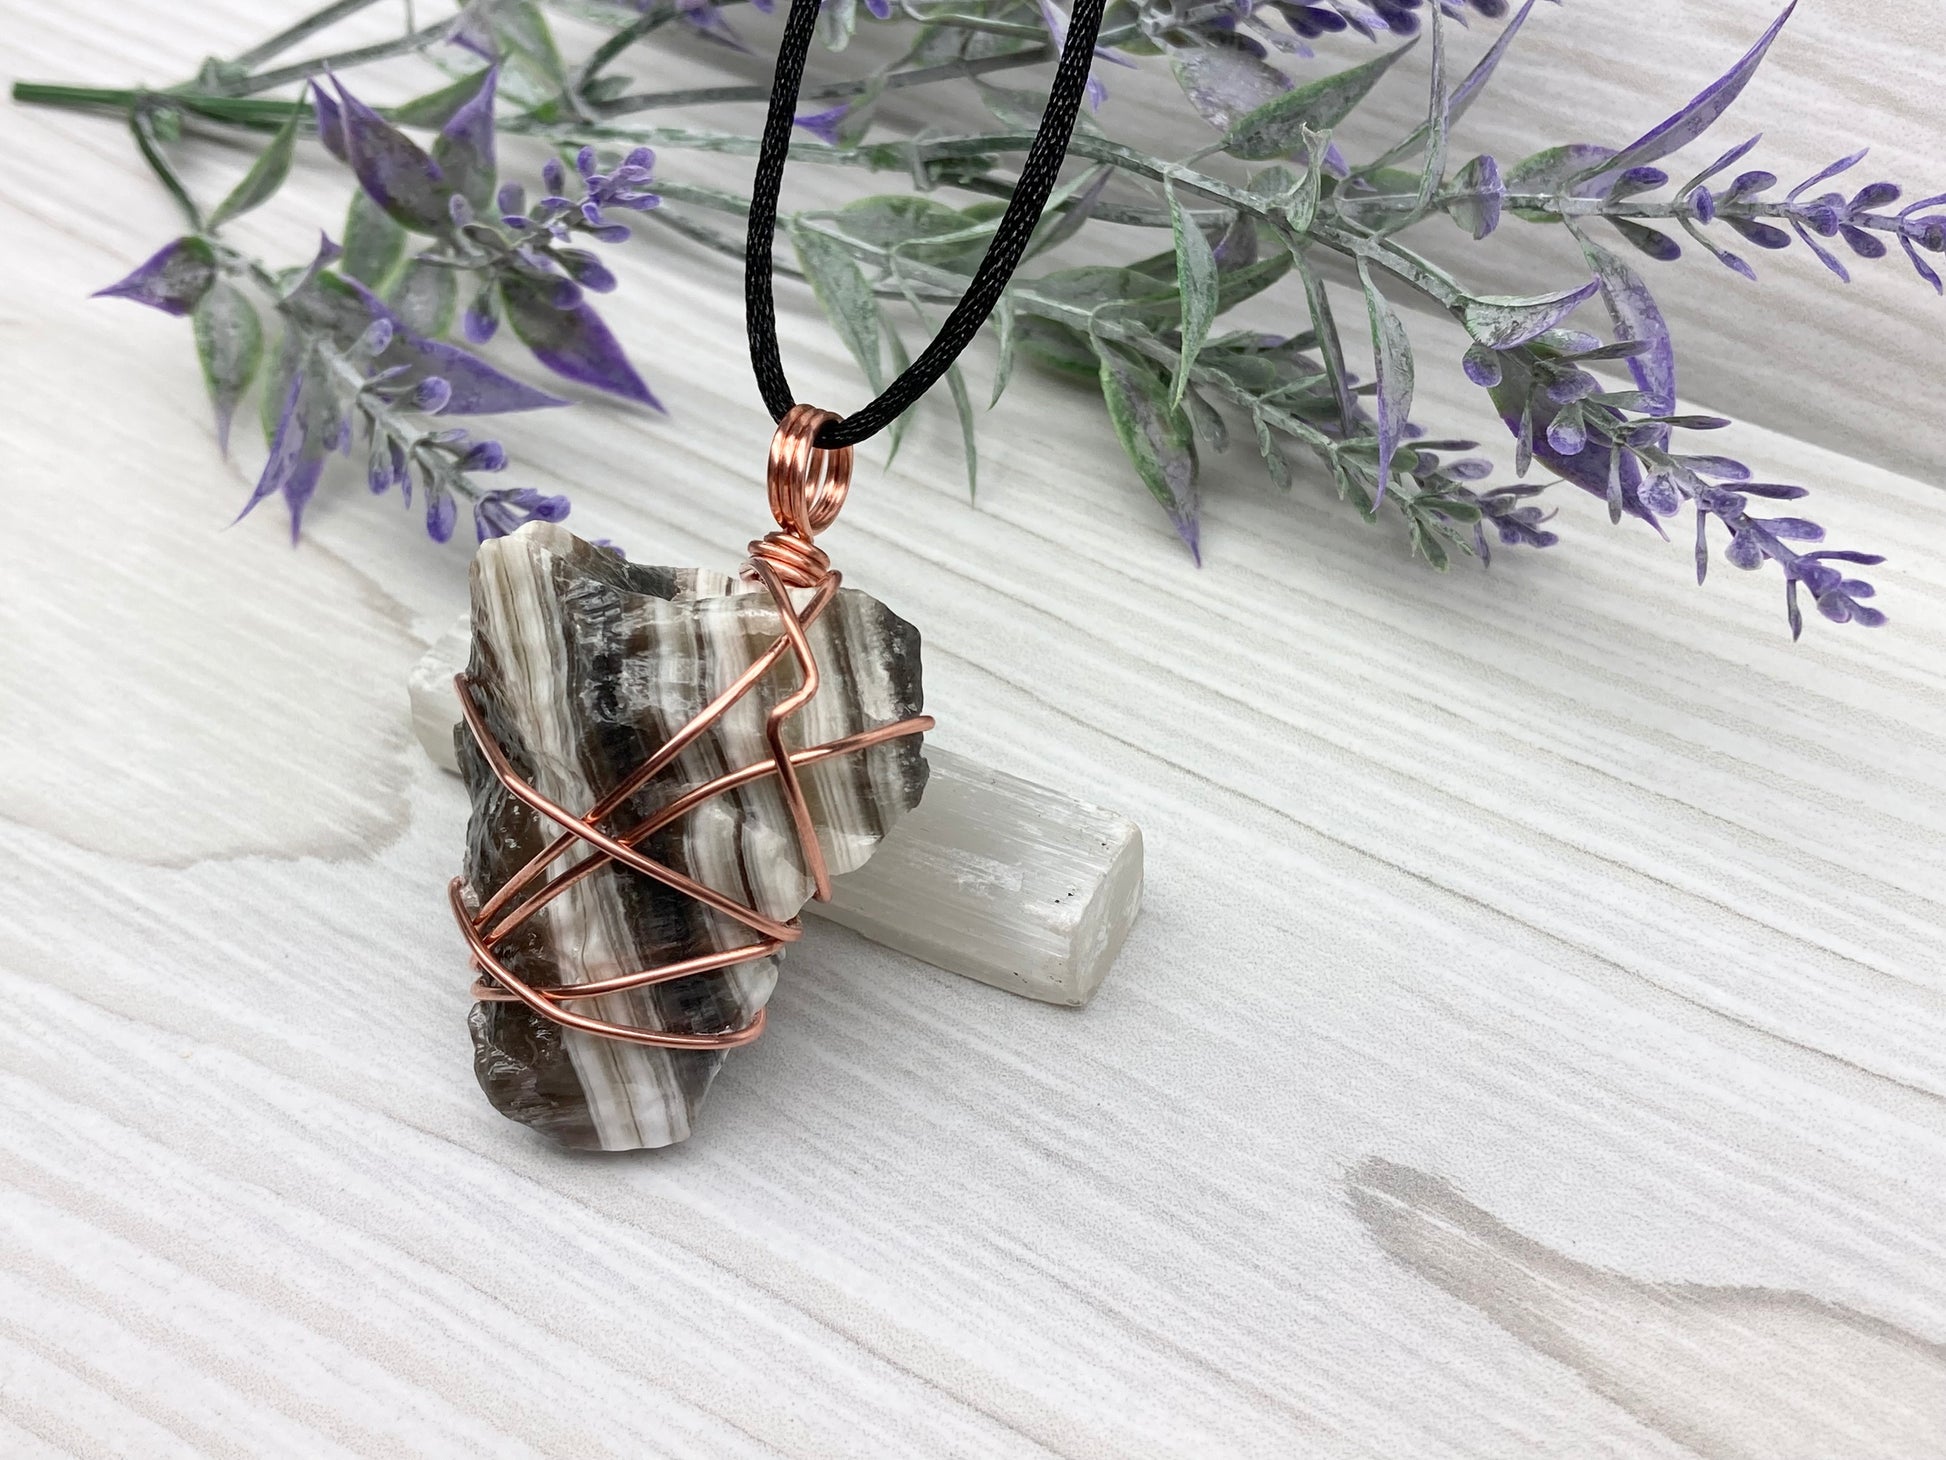 Chunky Phantom Calcite Necklace. Also Known As Zebra Calcite. Copper Wrapped Striped Calcite Pendant. Raw Natural Rough Crystal. Comes On A Black Necklace. New Age Jewelry. 